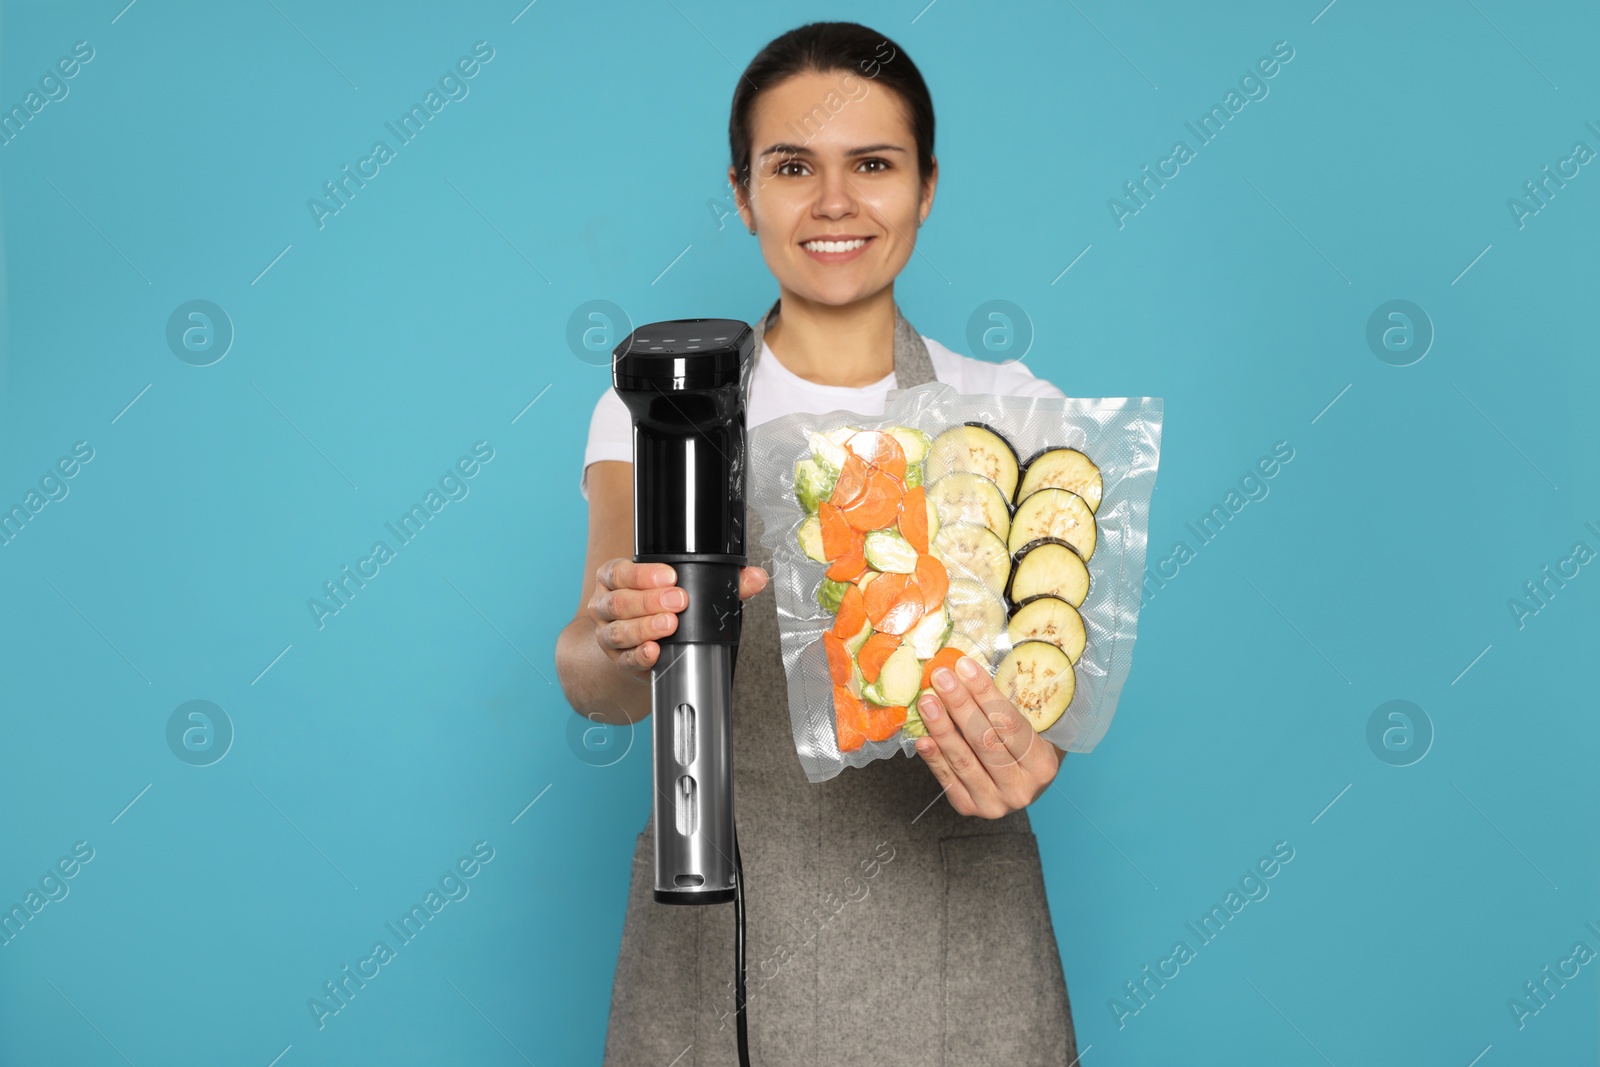 Photo of Beautiful young woman holding sous vide cooker and vegetables in vacuum packs on light blue background.